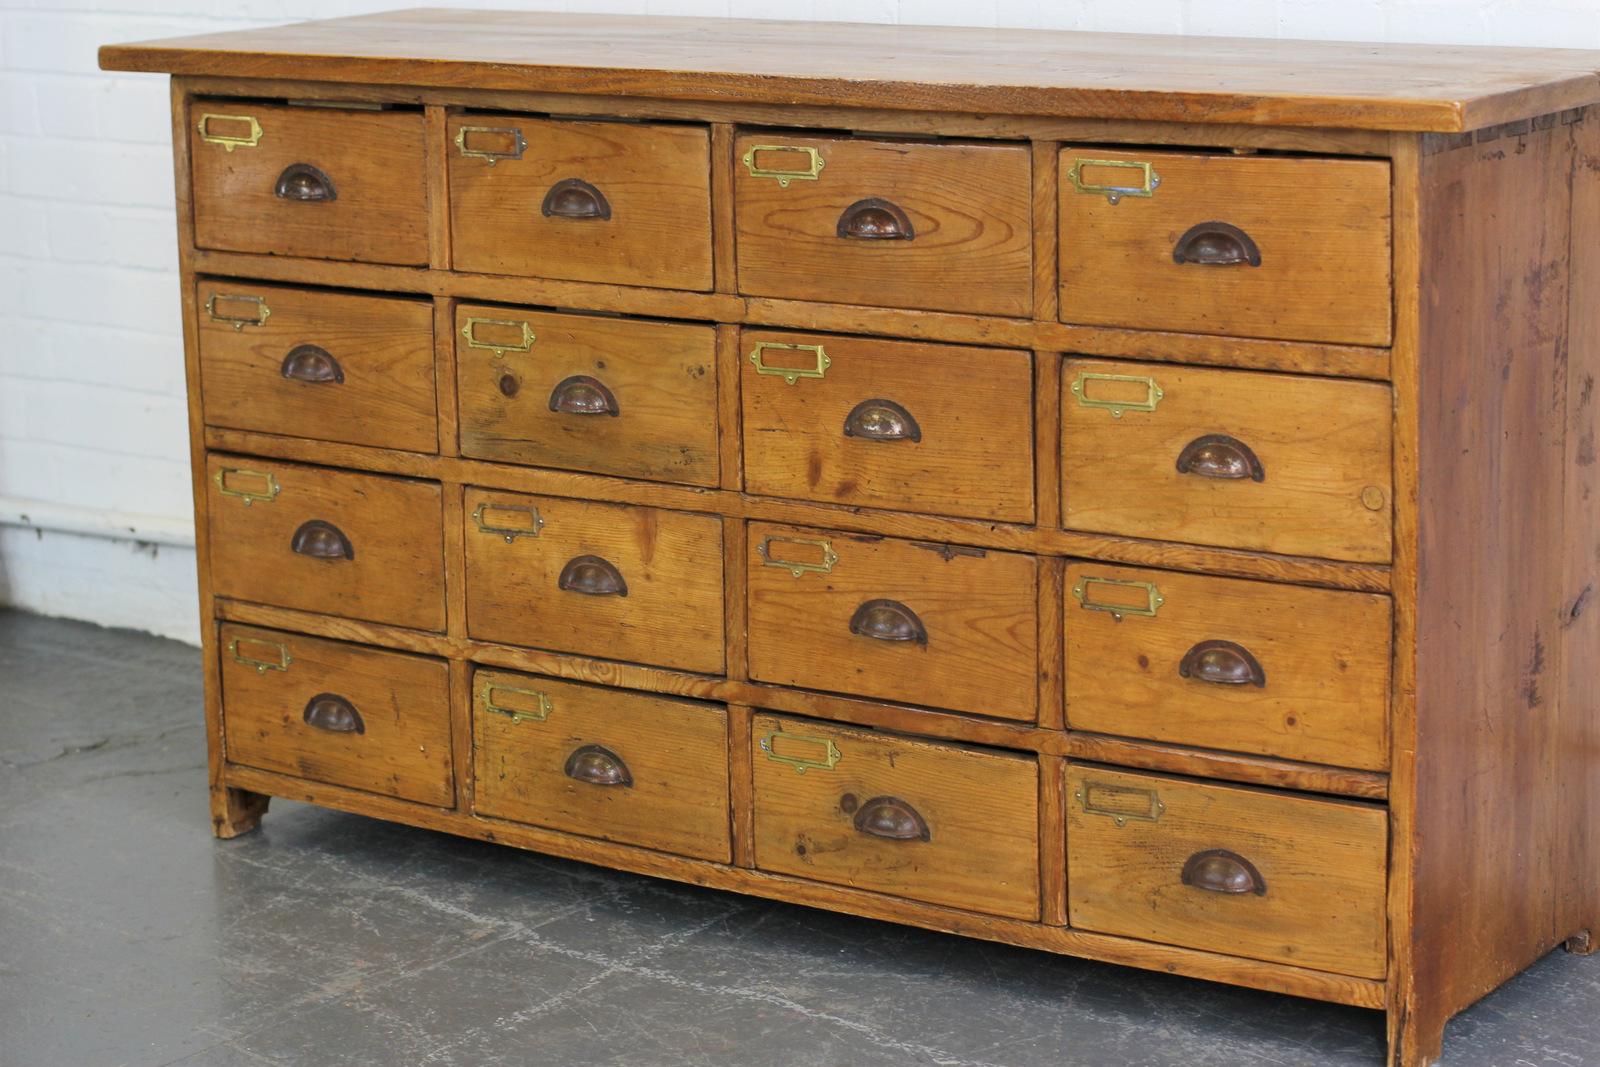 Bank of 19th century pine Haberdashery drawers.

- 16 identical drawers
- Hand cut dovetail joints
- French, Circa 1880s
- Measures: 150cm long x 50cm deep x 84cm tall
- Each drawer measures 27cm wide x 38cm deep x 13cm tall.

Condition